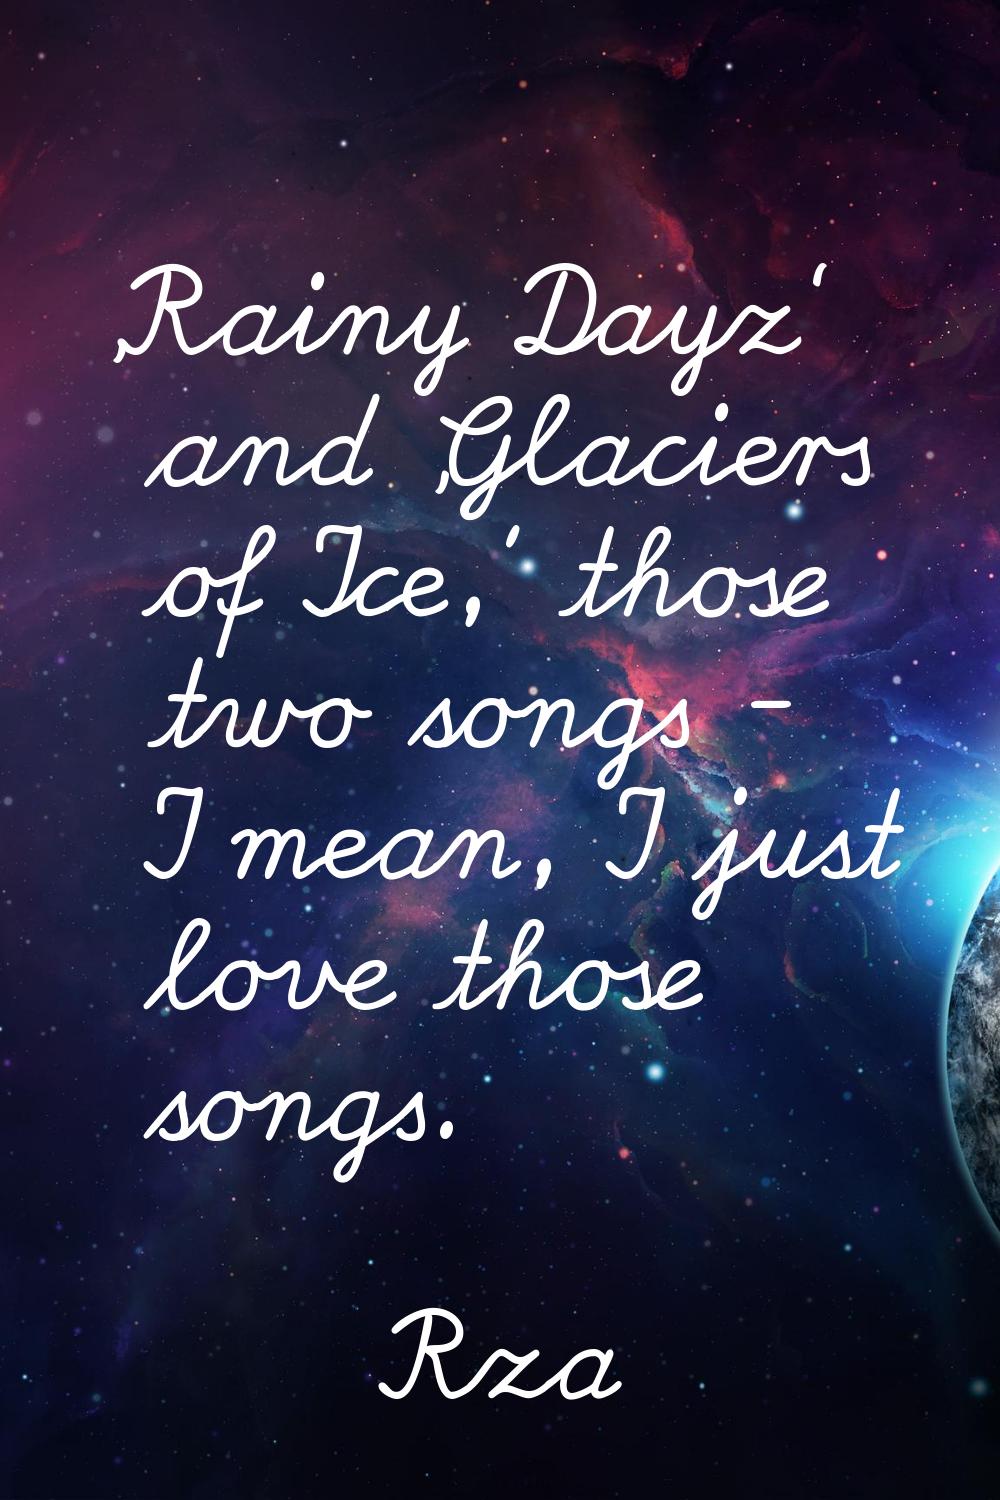 'Rainy Dayz' and 'Glaciers of Ice,' those two songs - I mean, I just love those songs.